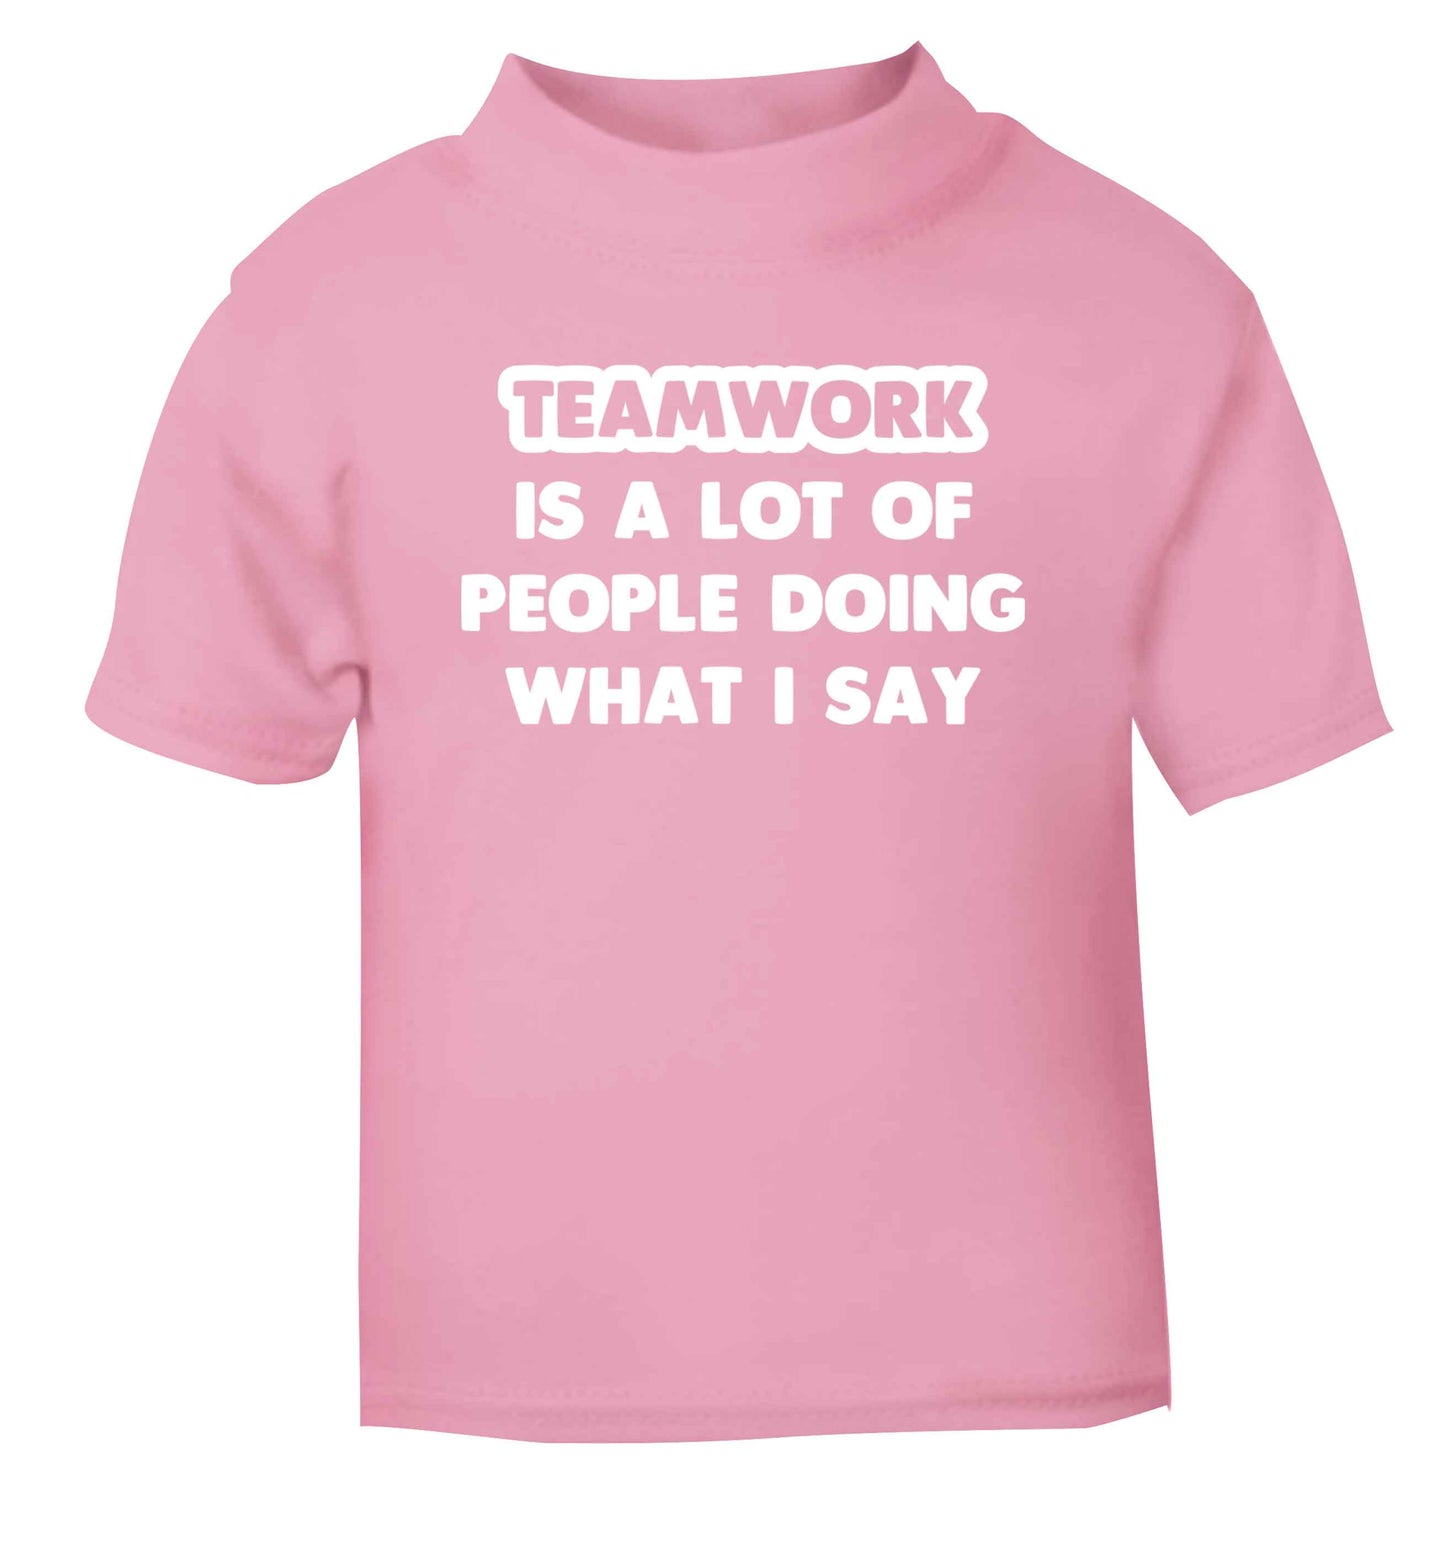 Teamwork is a lot of people doing what I say light pink Baby Toddler Tshirt 2 Years